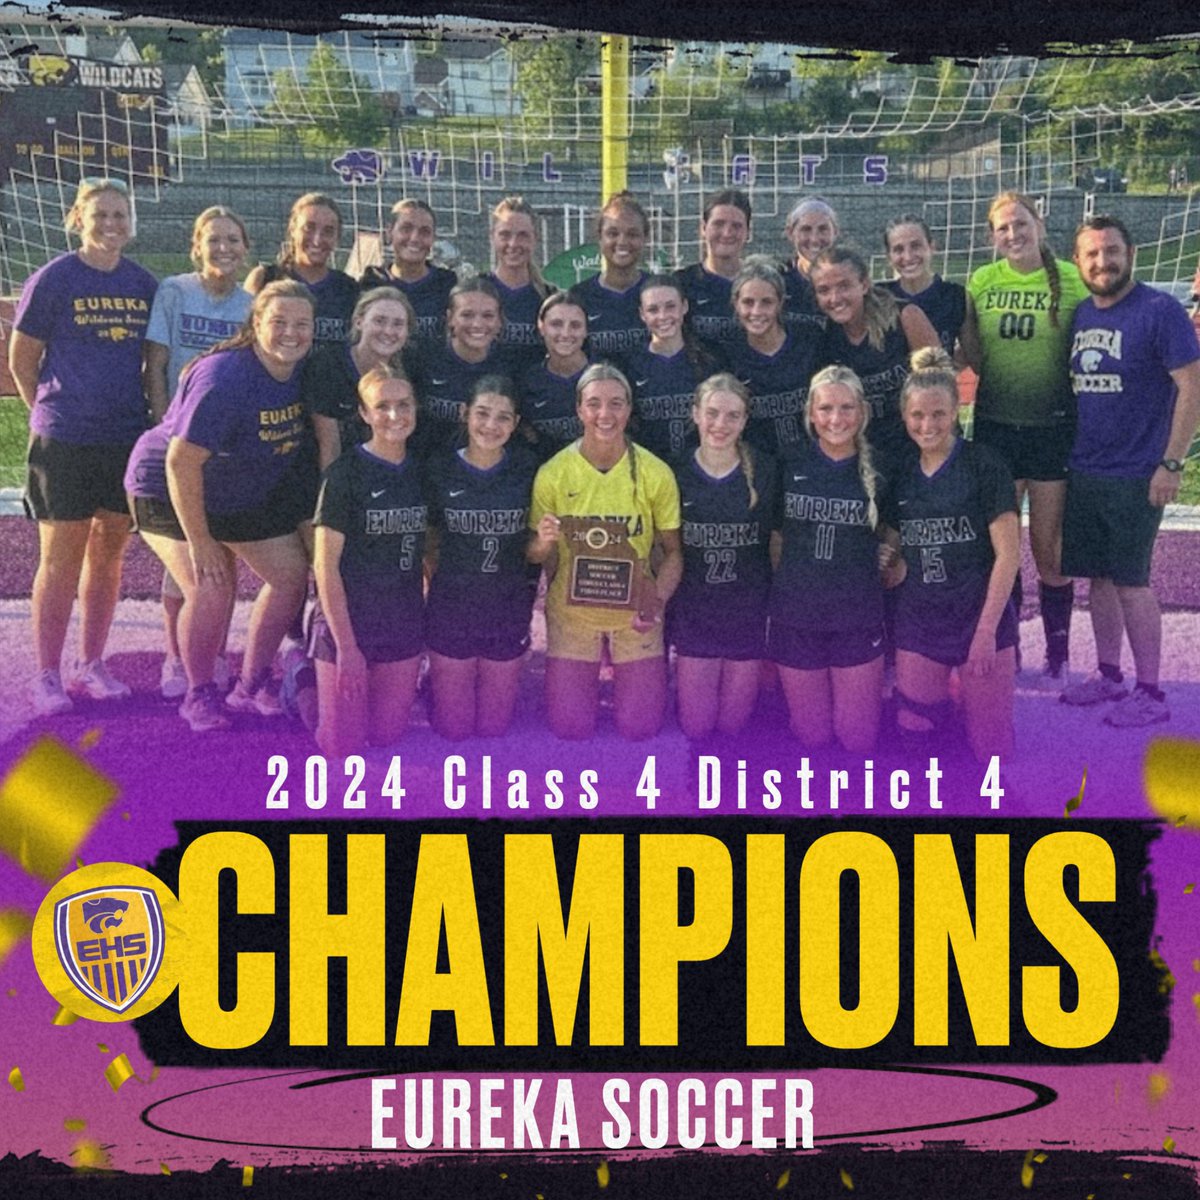 2024 DISTRICT CHAMPS!!! Double OT game winner by Bailey Flanagan assisted by Anna Beam. Great team effort and shutout for Stella Eremita and the defense!